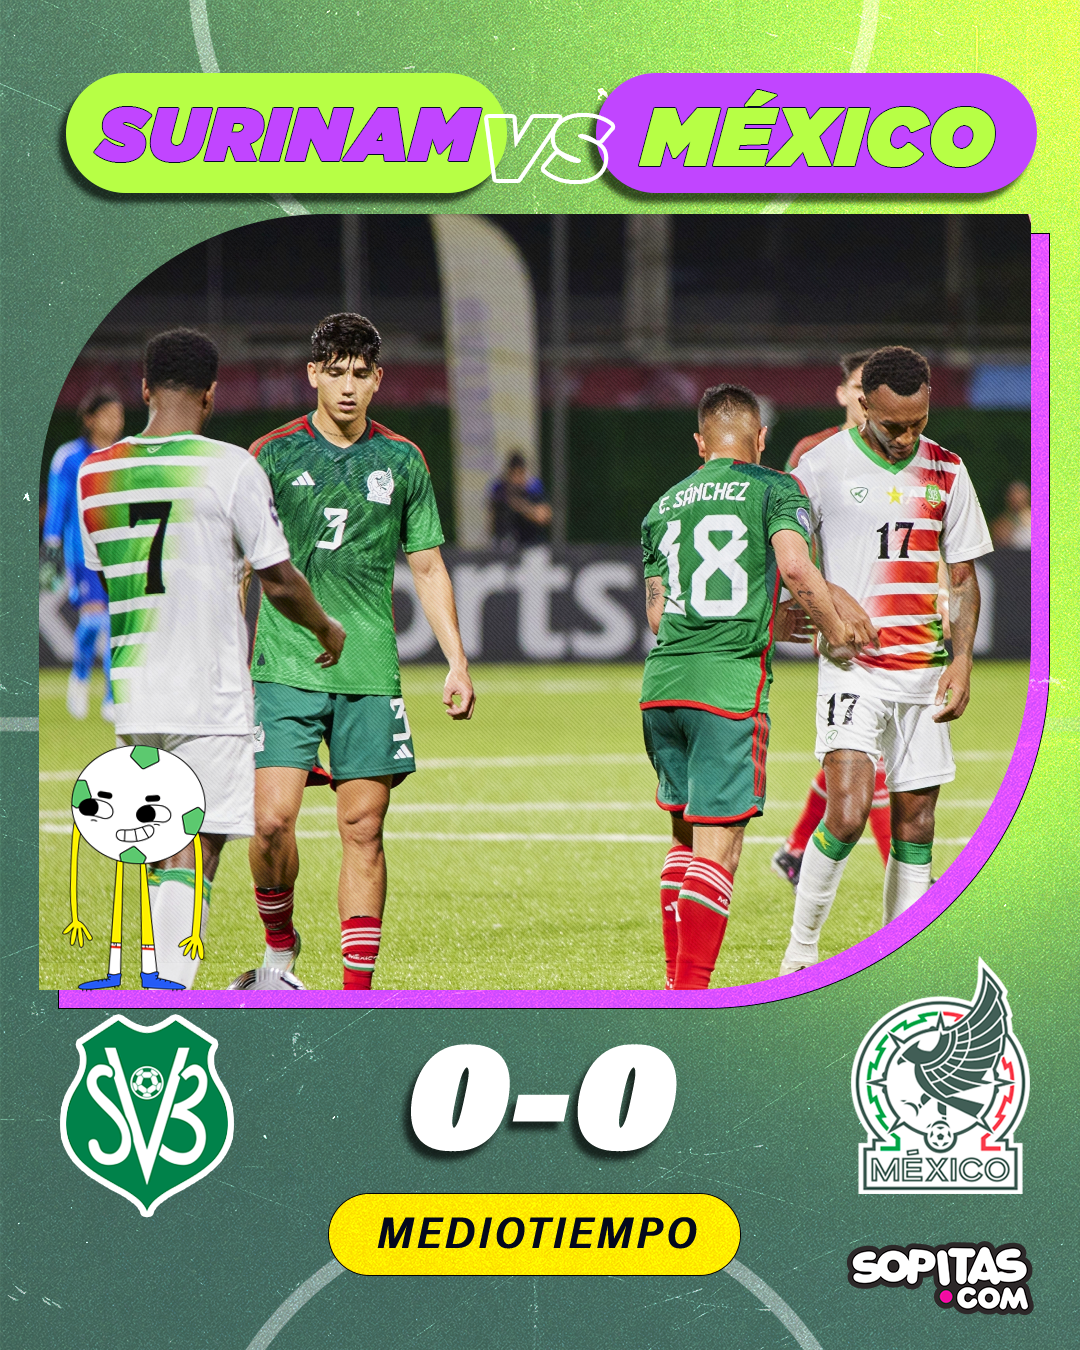 Half time score between Suriname and Mexico